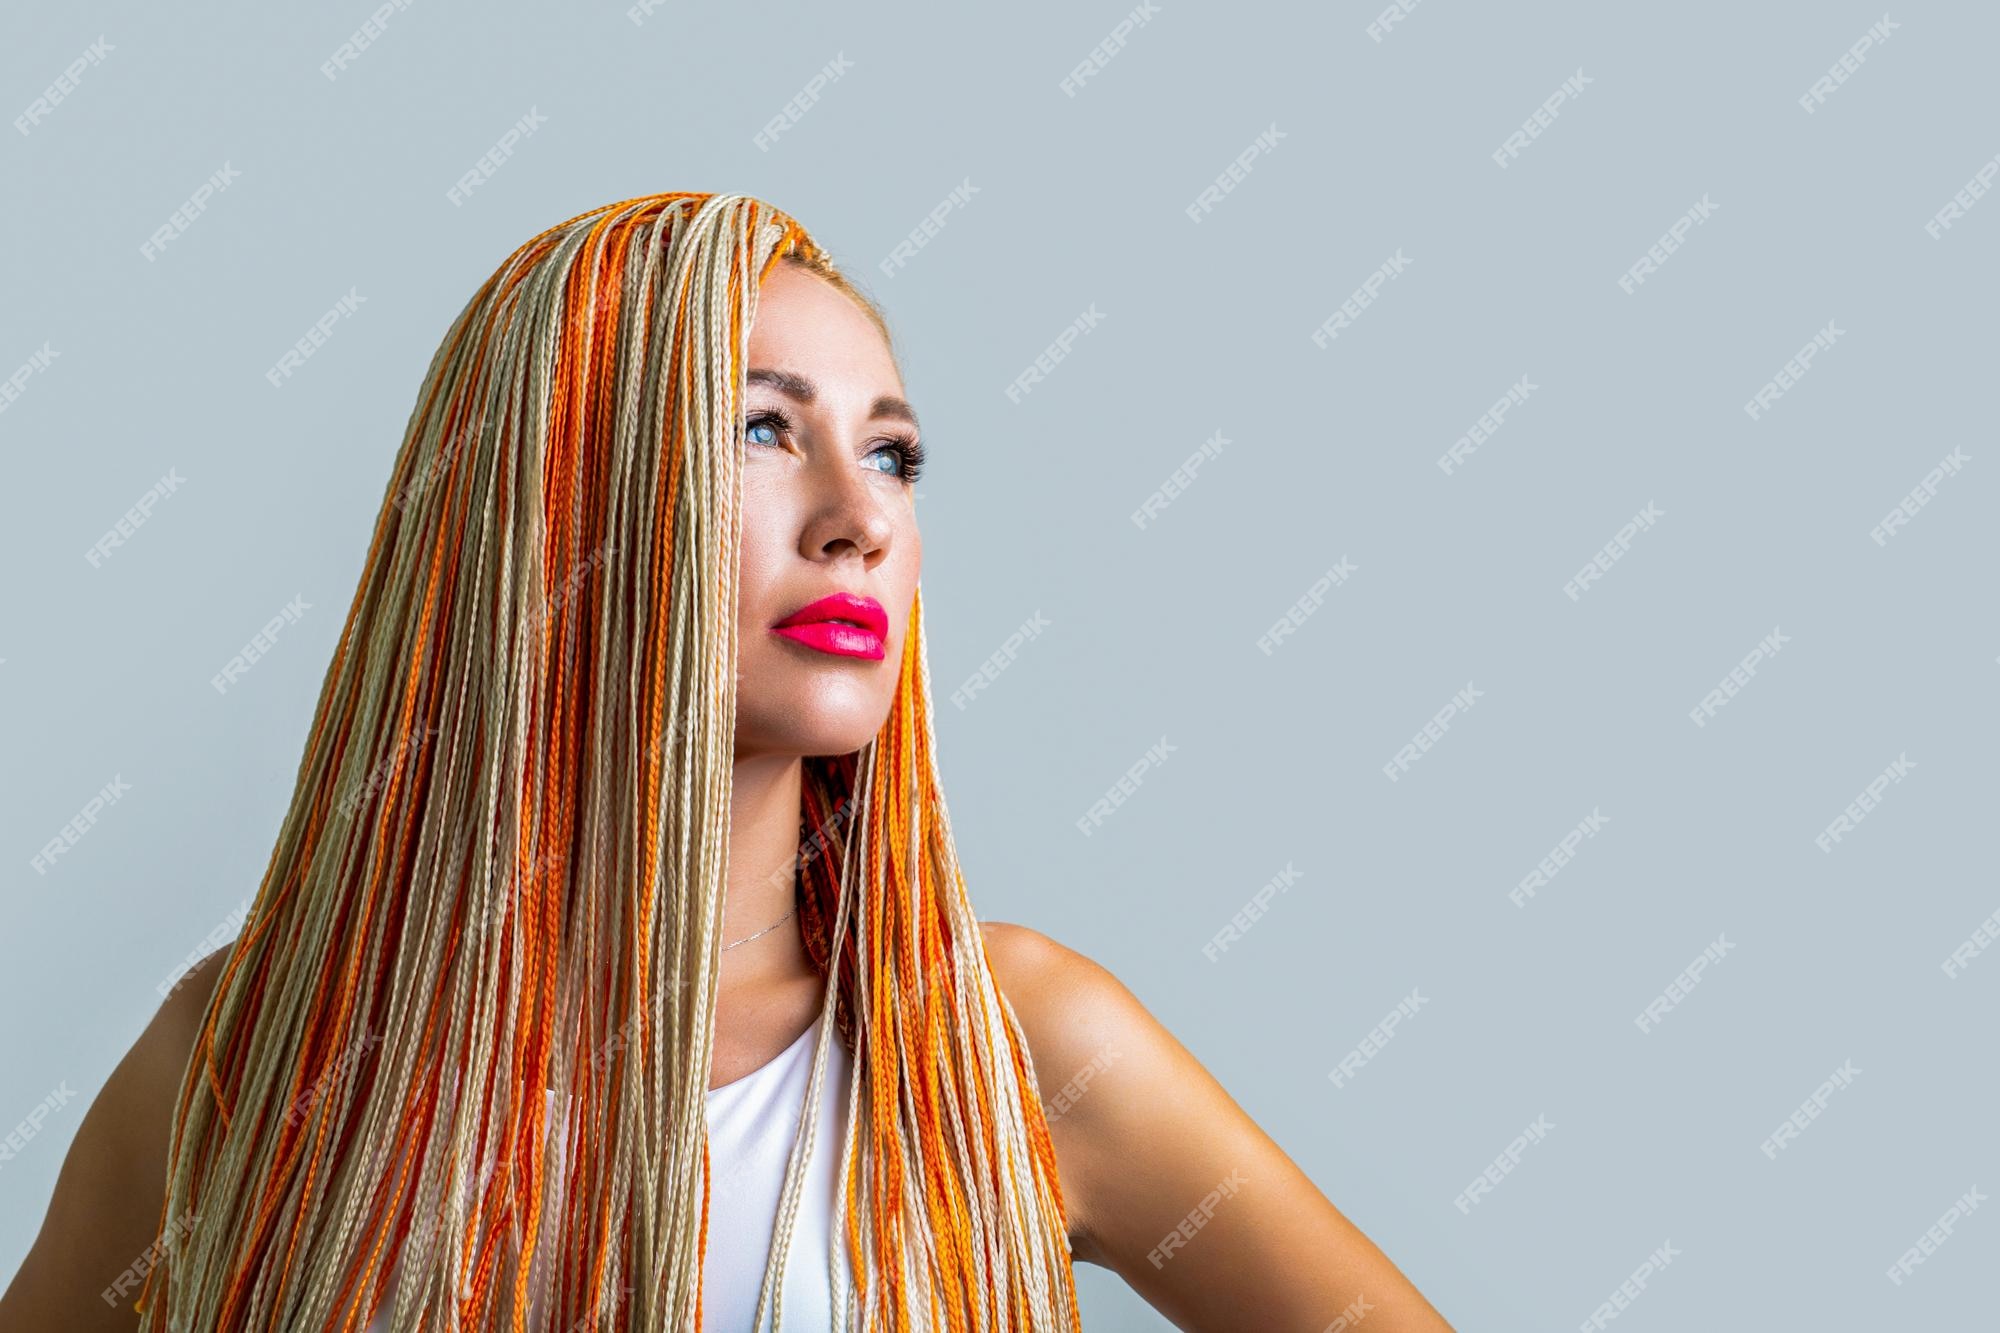 Premium Photo | Girl braids portrait of beautiful young girl with braids  beautiful stylish woman with colorful kanekalon braided in her hair pretty  woman colorful orange hair braids hairdresser salon concept